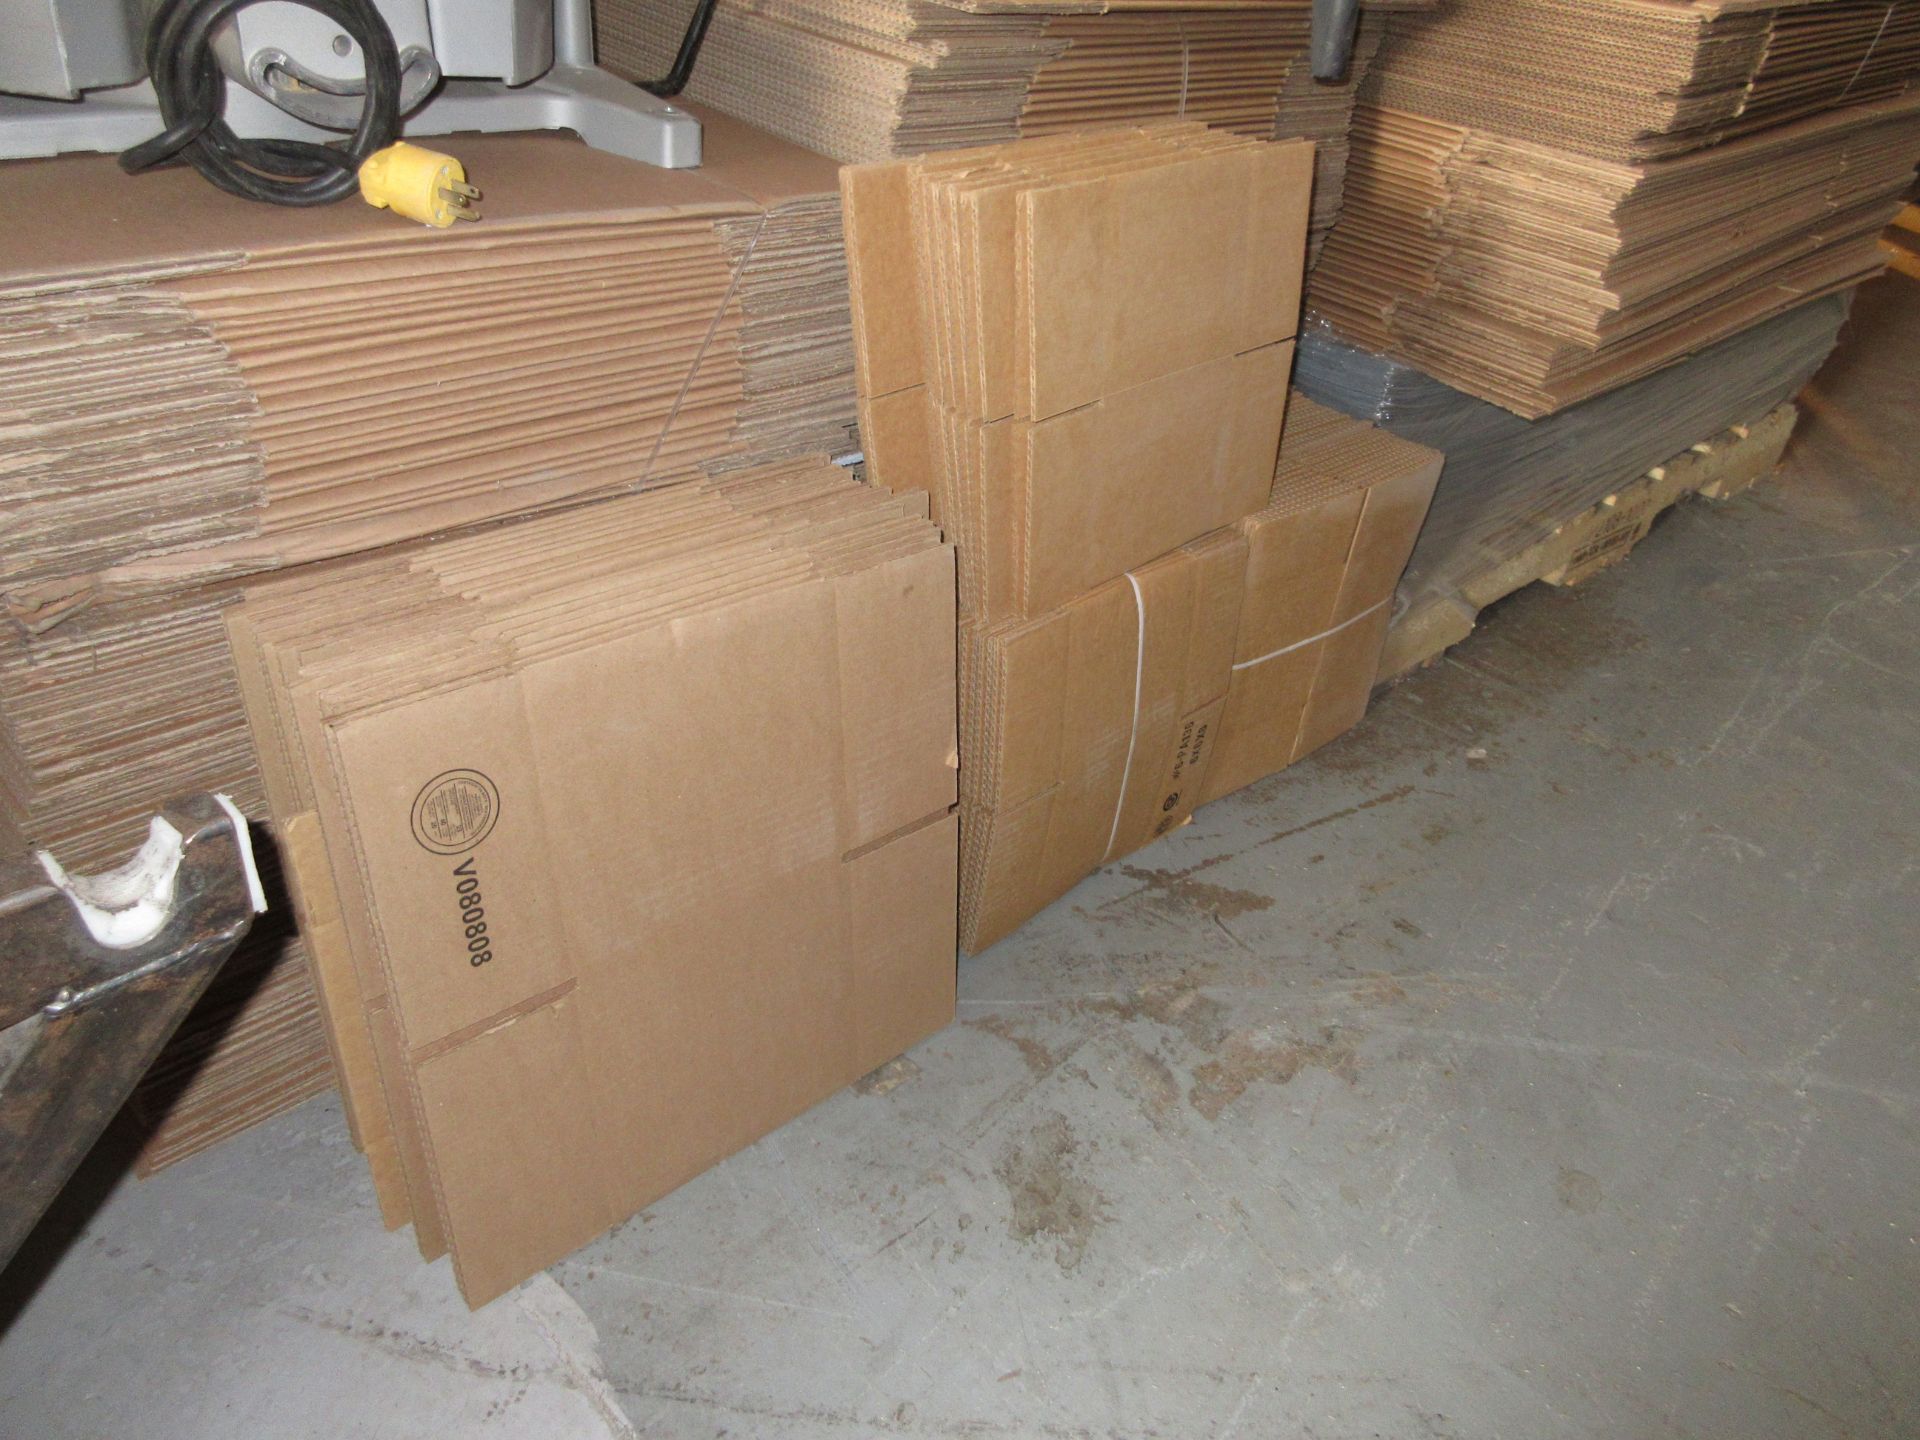 LOT OF ASSORTED CARDBOARD BOXES 12''X15'', 6''X6'', ETC. (550 PIECES)